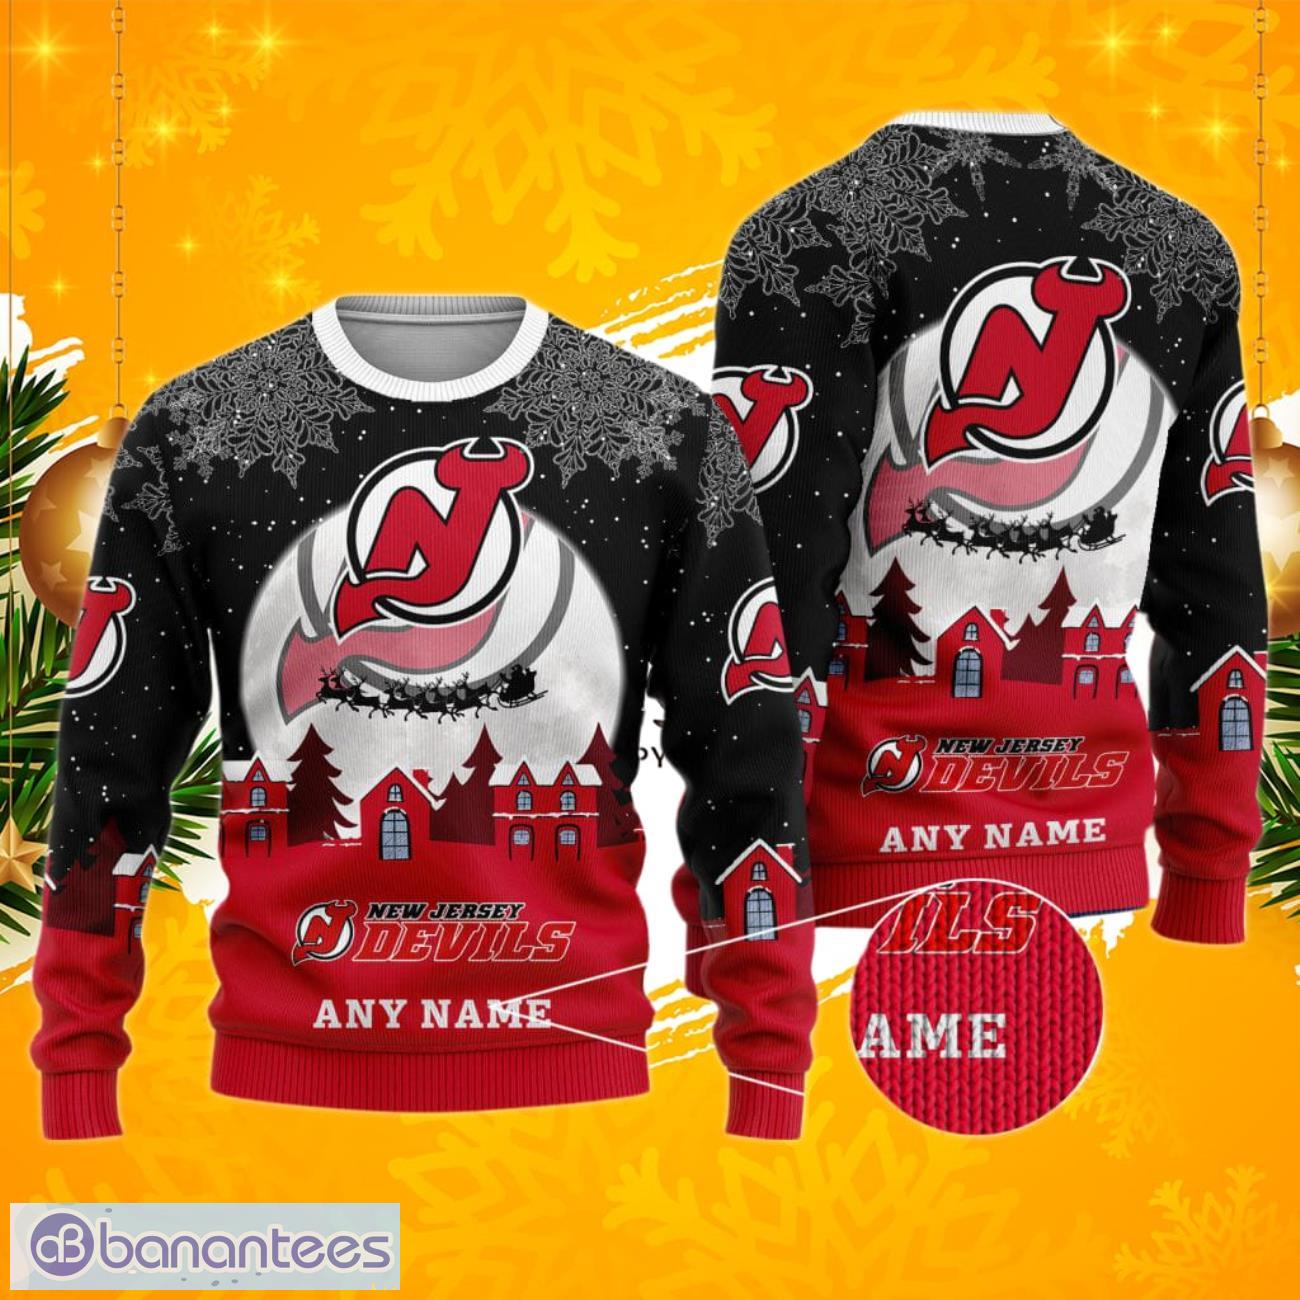 New Jersey Devils Shirts, New Jersey Devils Sweaters, Devils Ugly